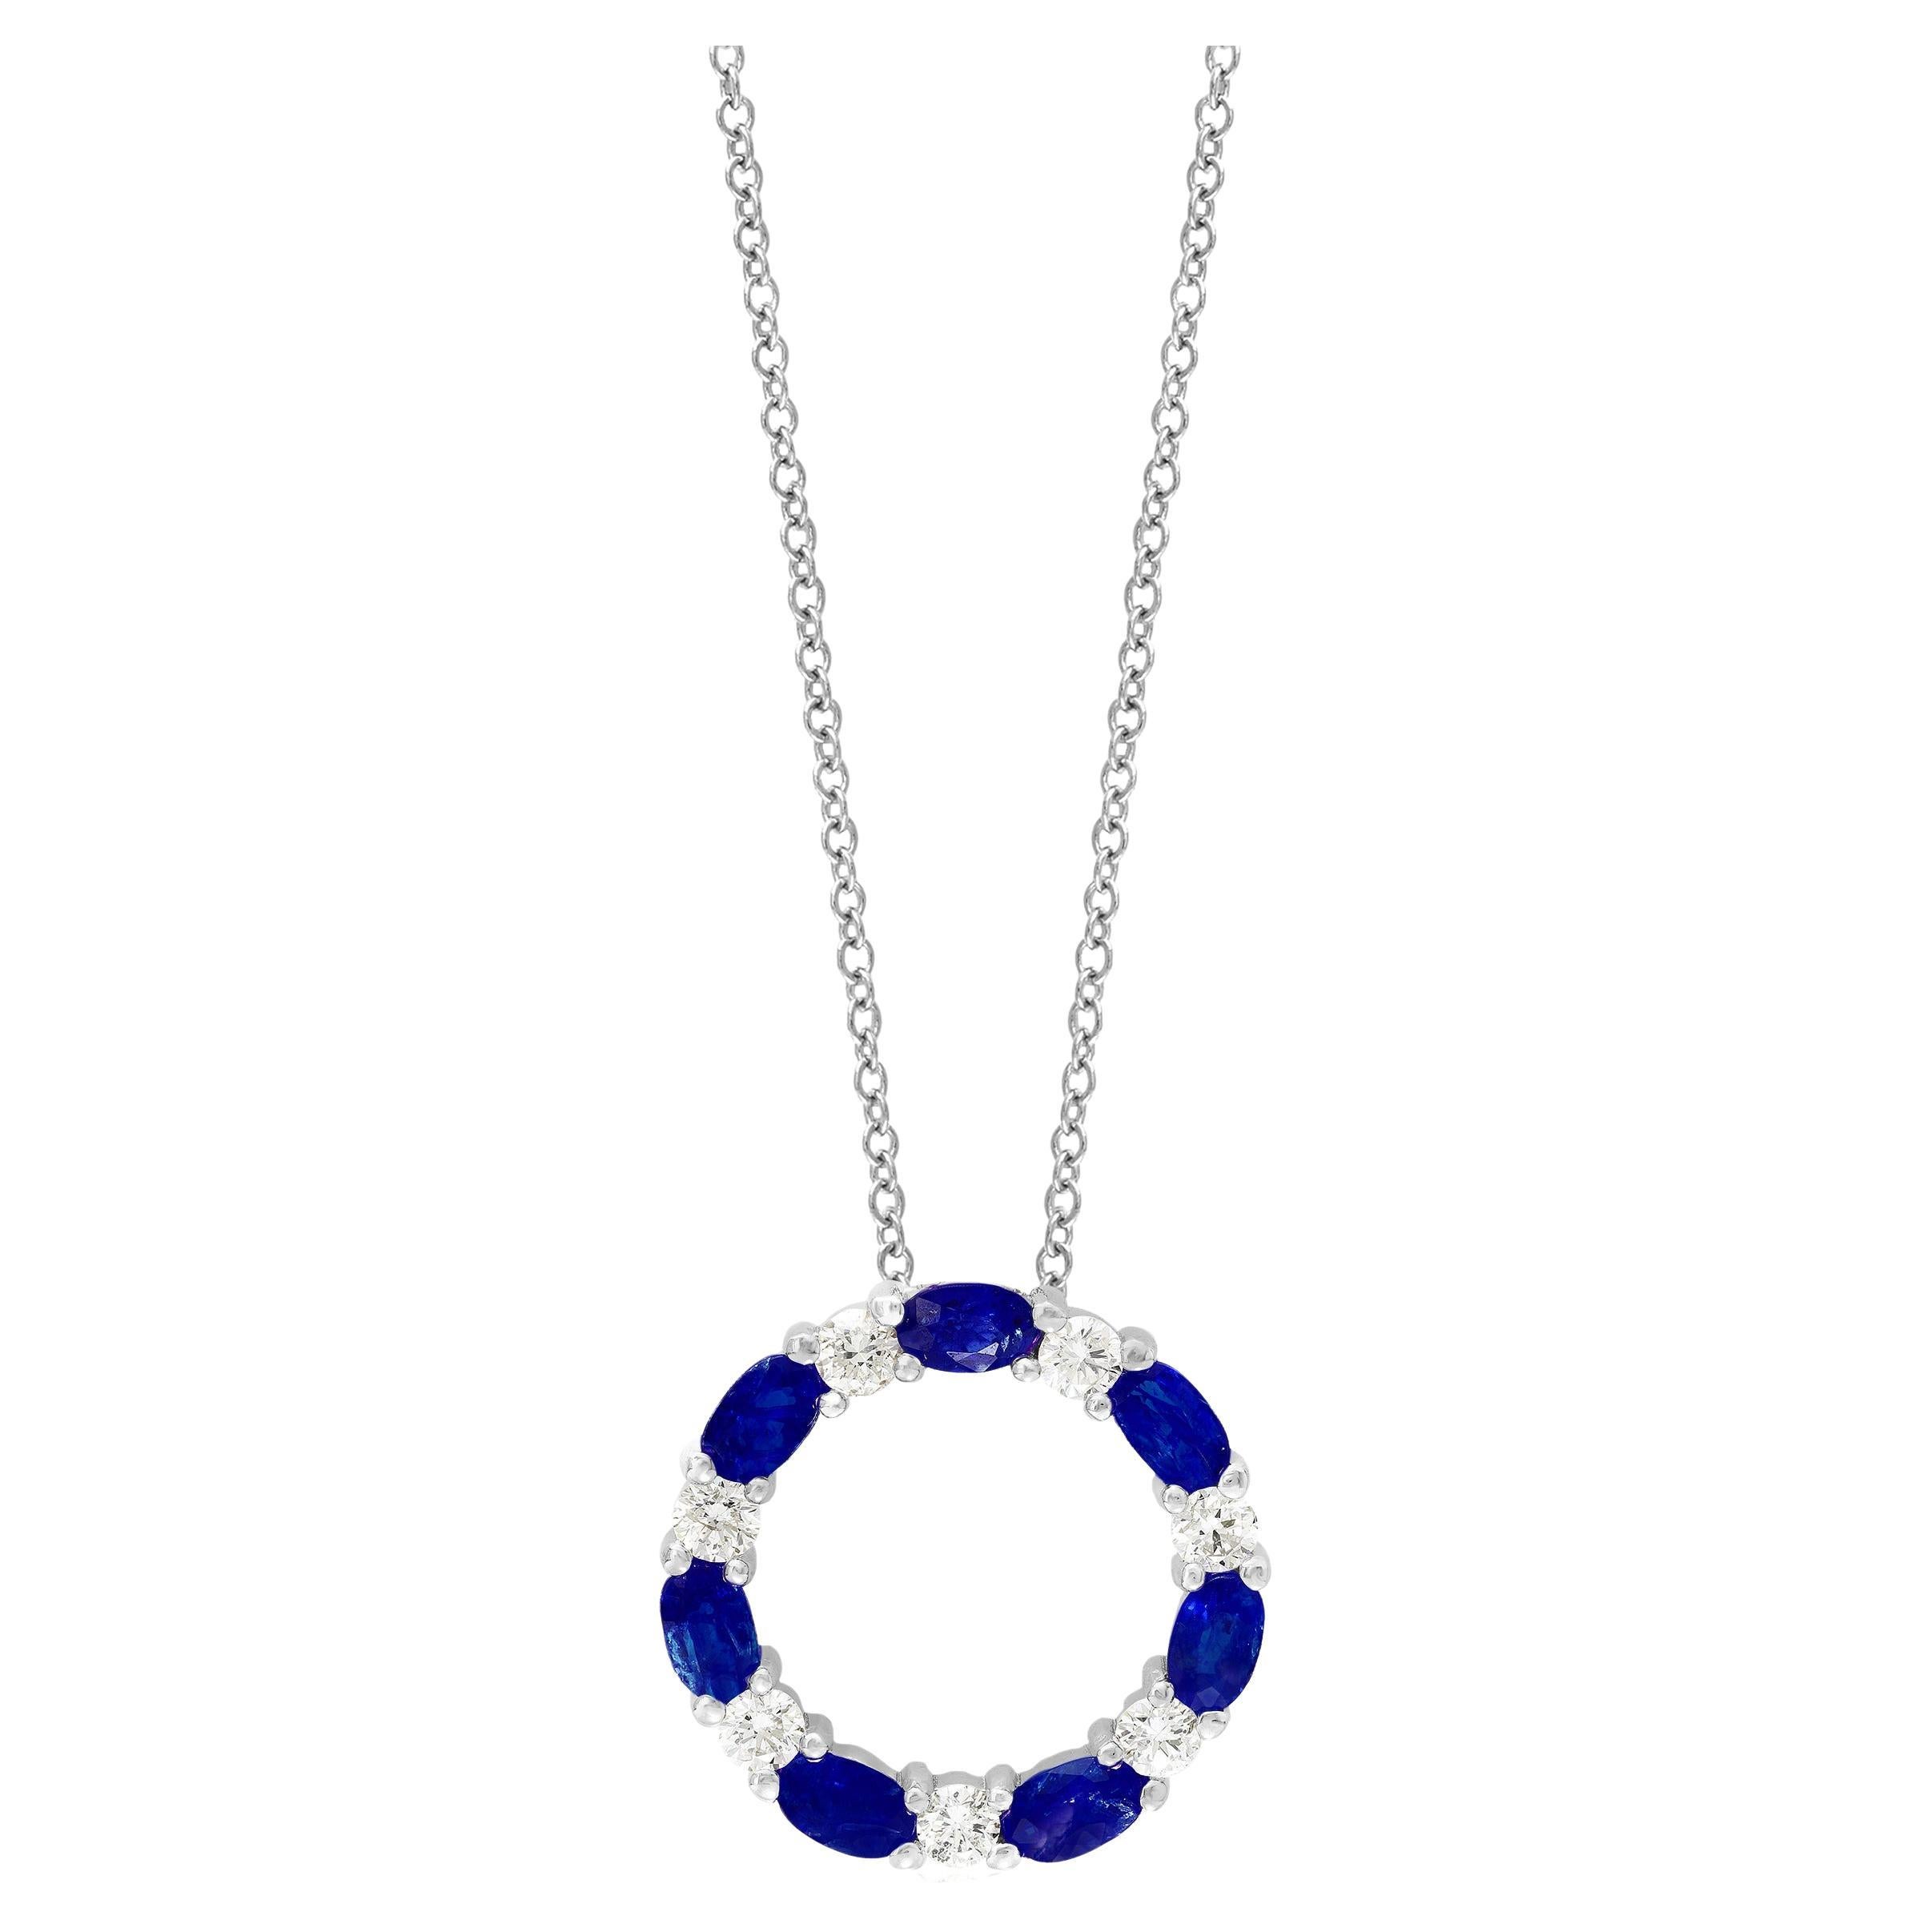 2.05 Carat Blue Sapphire and Diamond Circle Pendant Necklace in 14k White Gold